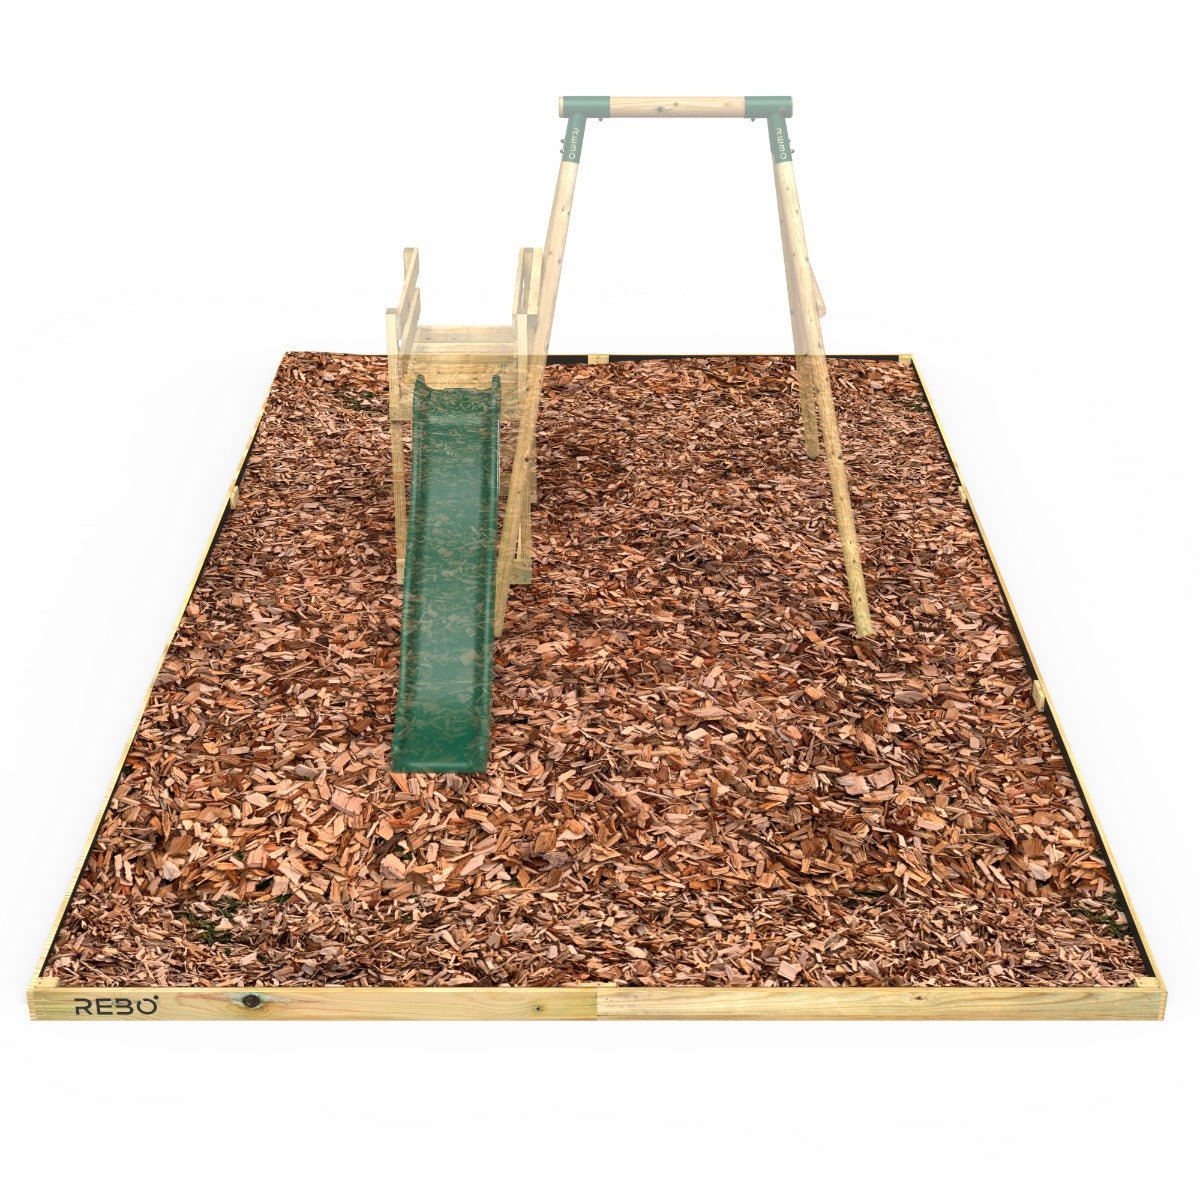 Rebo Safety Play Area Protective Bark Wood Chip Kit - 3.6M x 5.1M